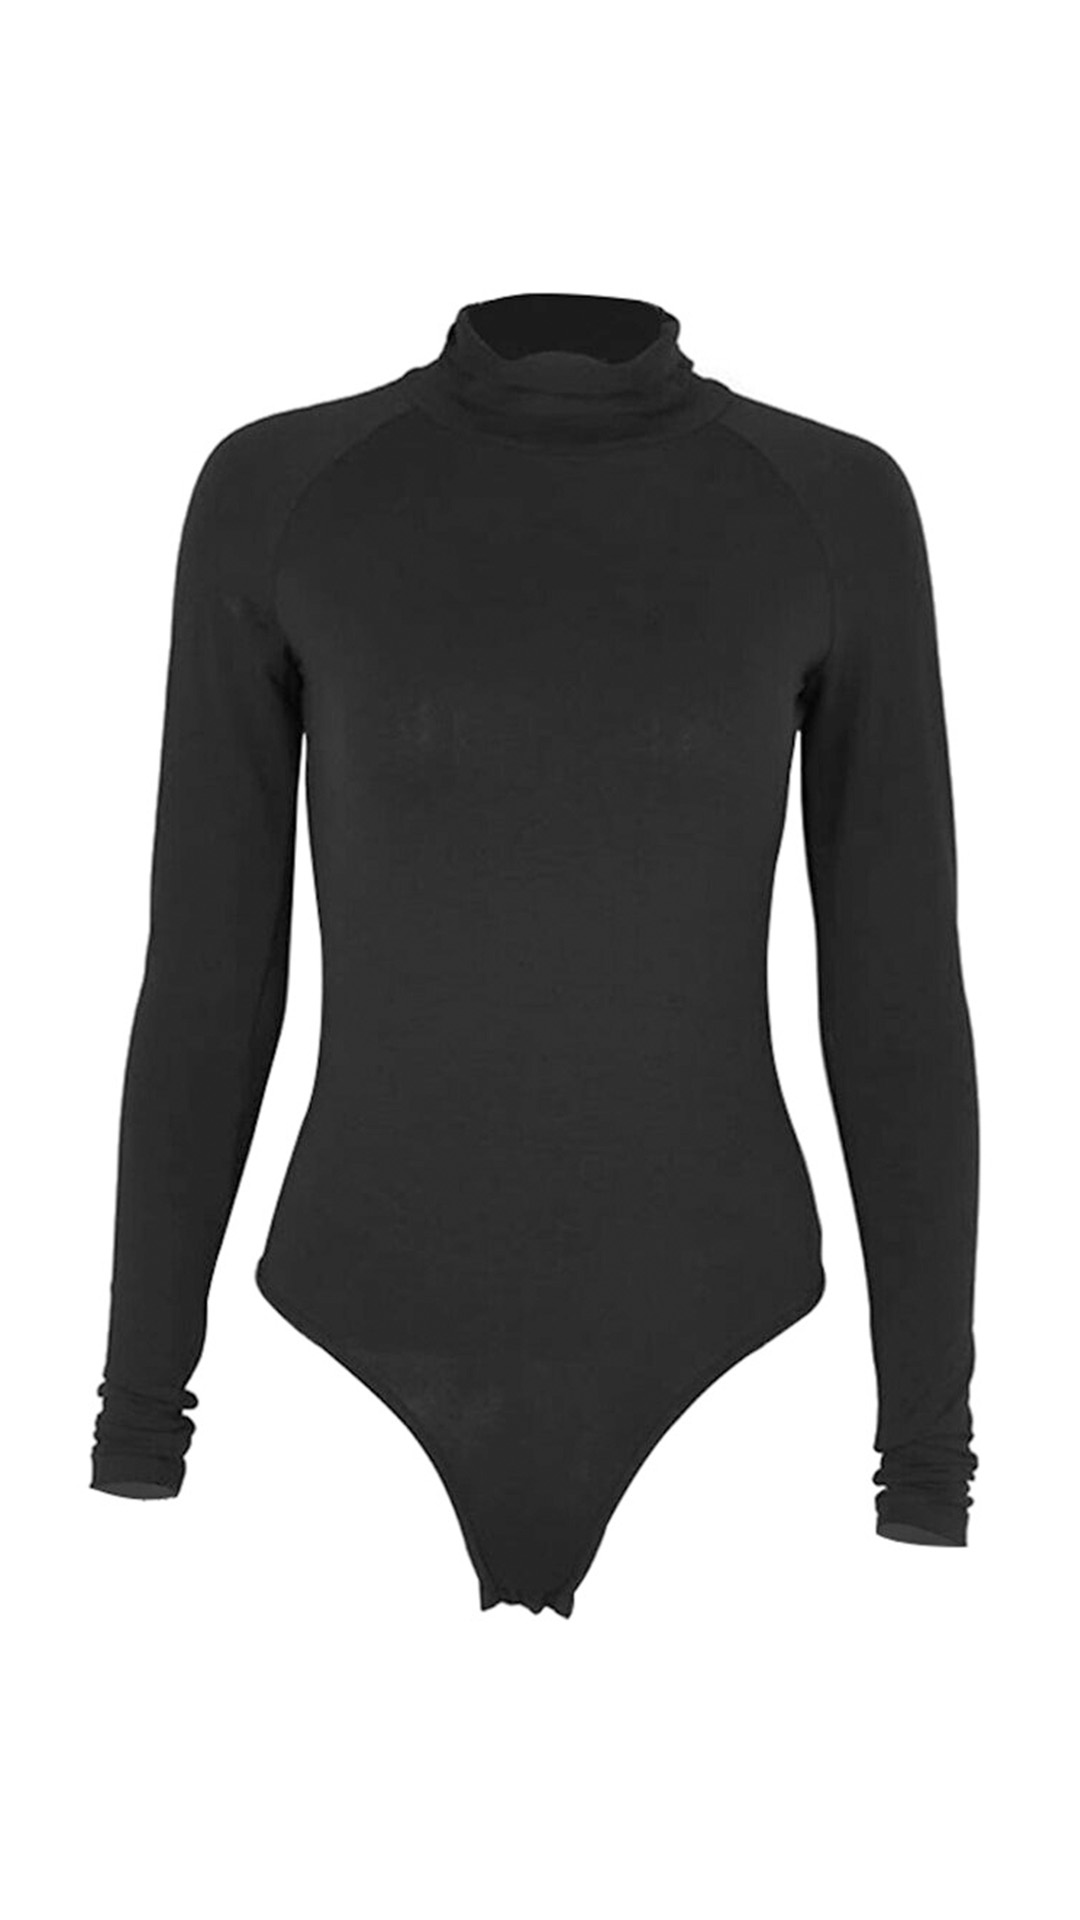 THE HIGH-COLLARED BODYSUIT